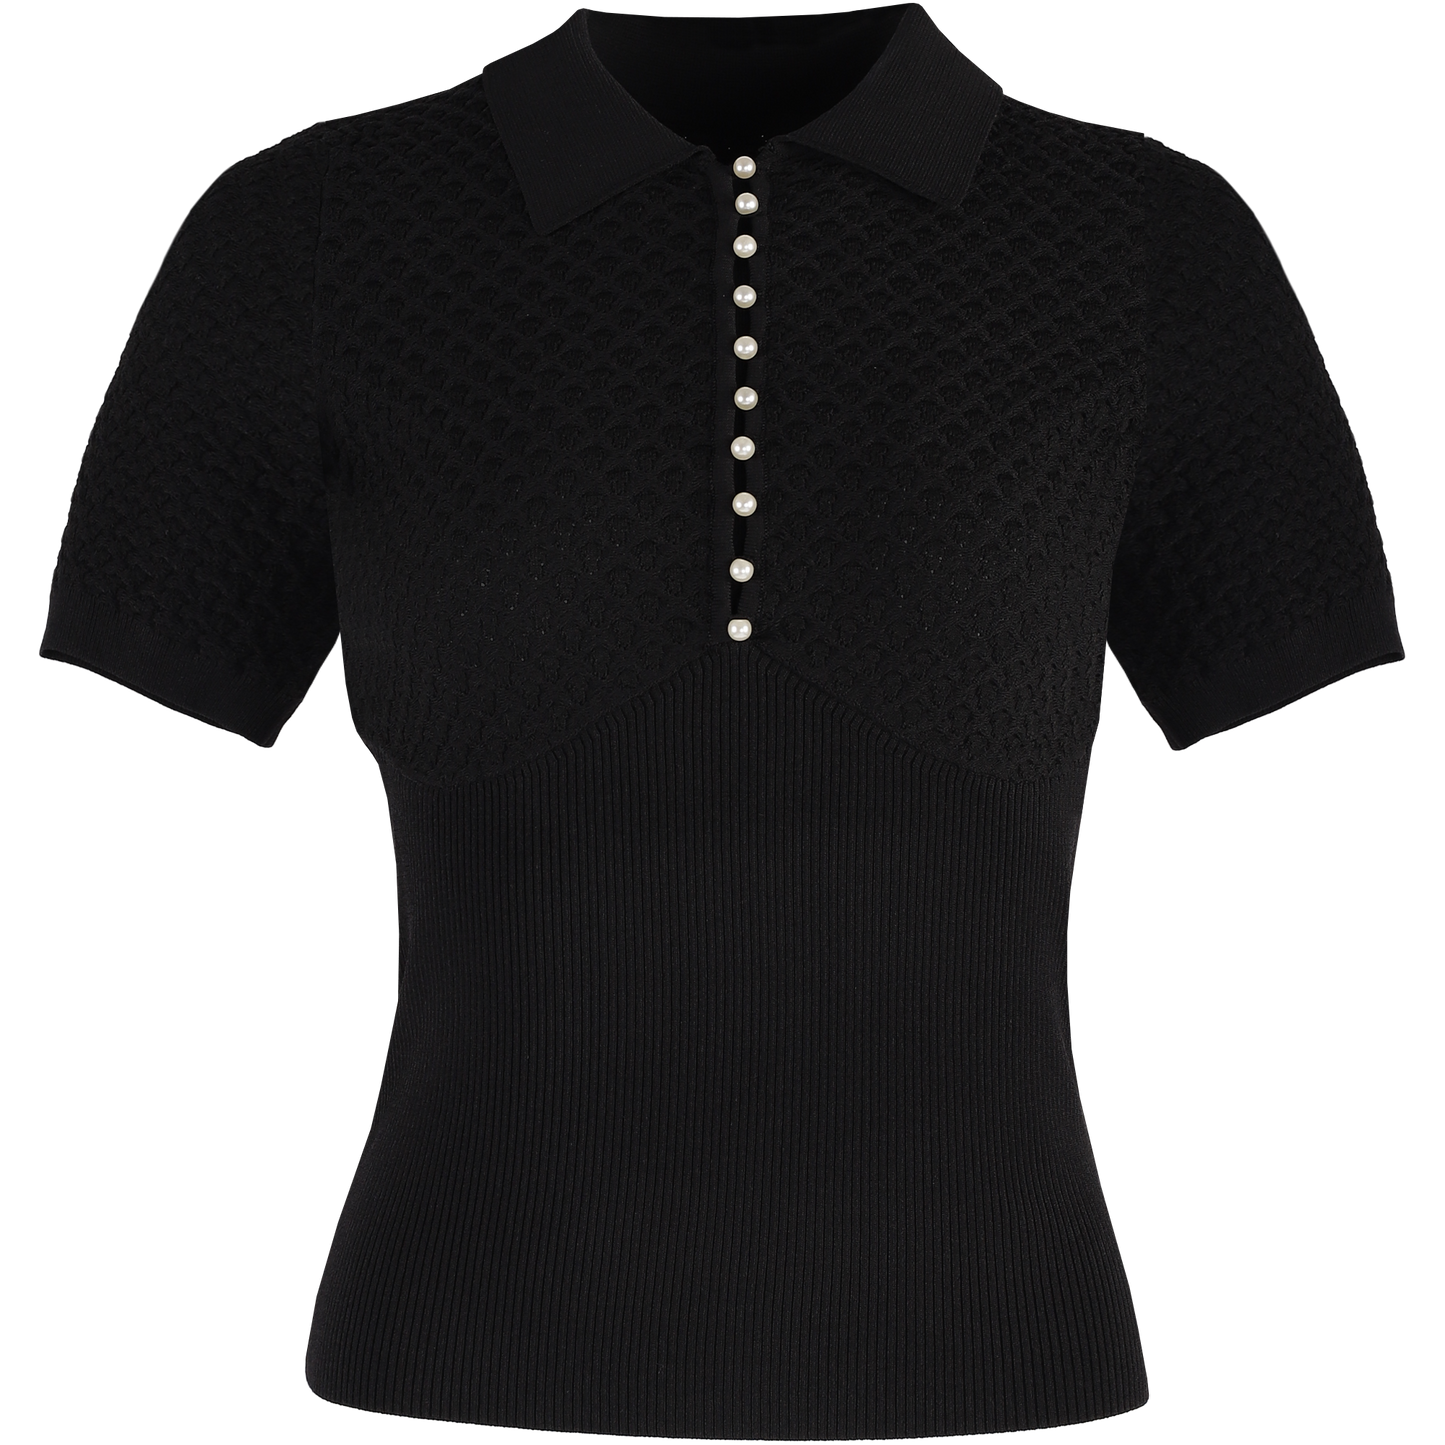 Black Knitted Ladies Blouse — Stylish Uniforms for Your Front Line Staff